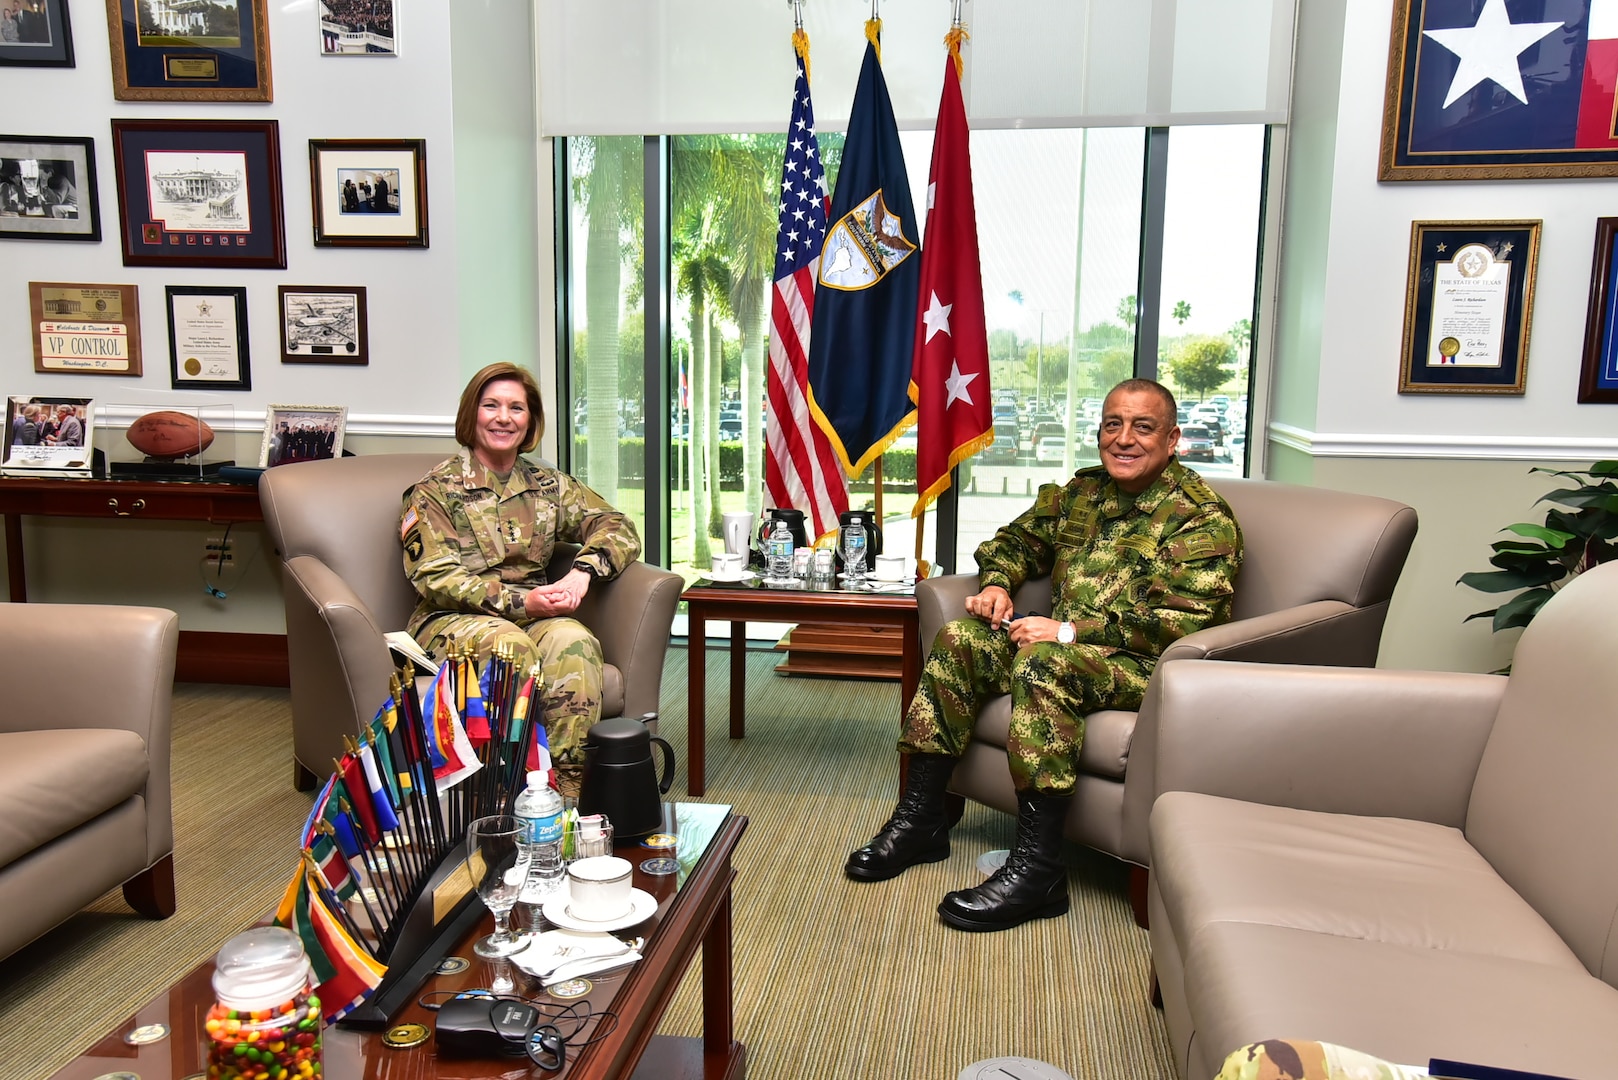 The commander of U.S. Southern Command, U.S. Army Gen. Laura Richardson, and Colombian Gen. Luis Navarro, Colombia’s Chief of Defense, meet during a visit to SOUTHCOM headquarters.